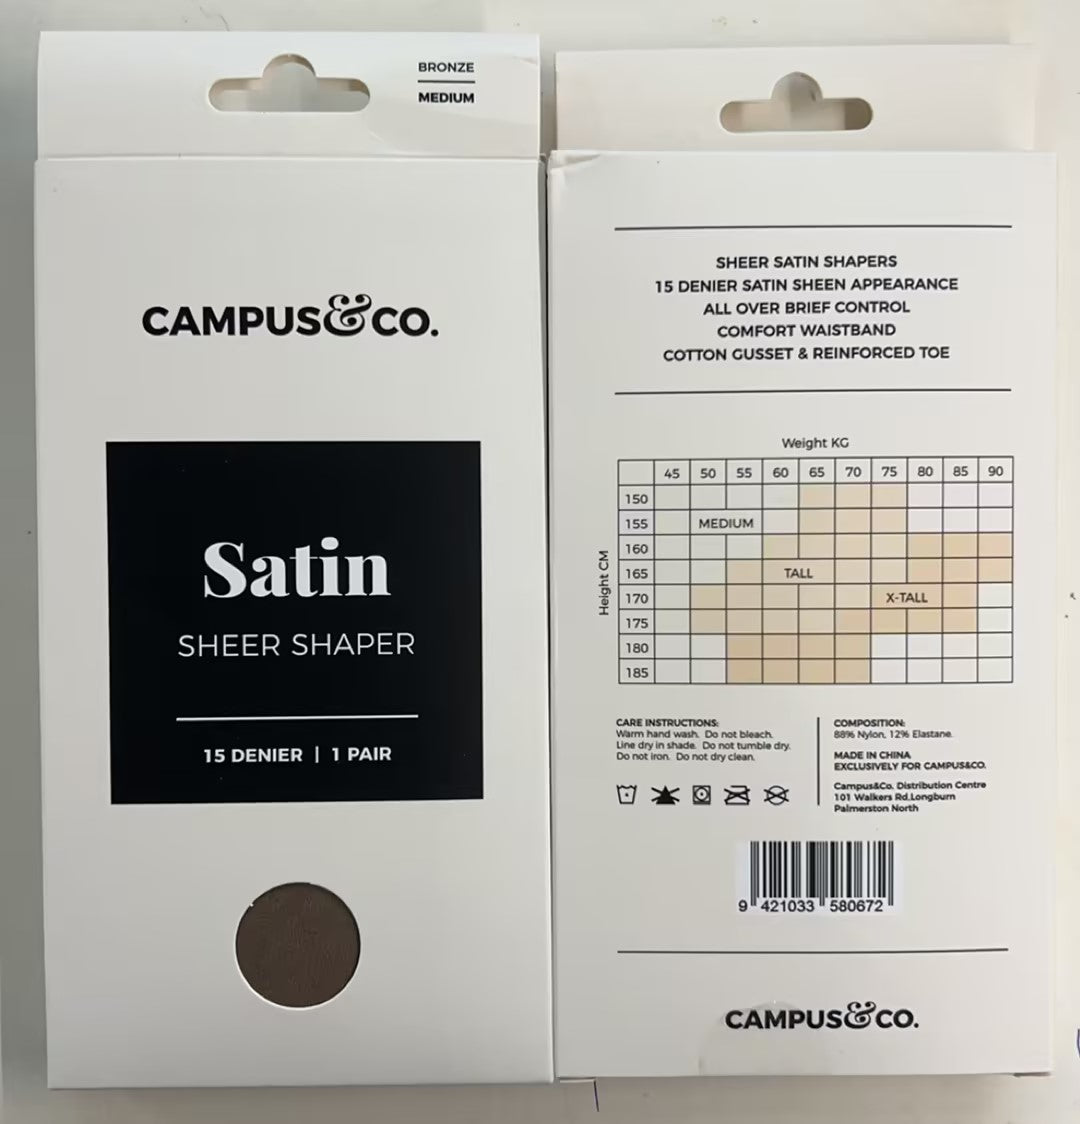 Campus&Co. Satin Sheer Shaper Bronze Extra Tall (Case of 10)